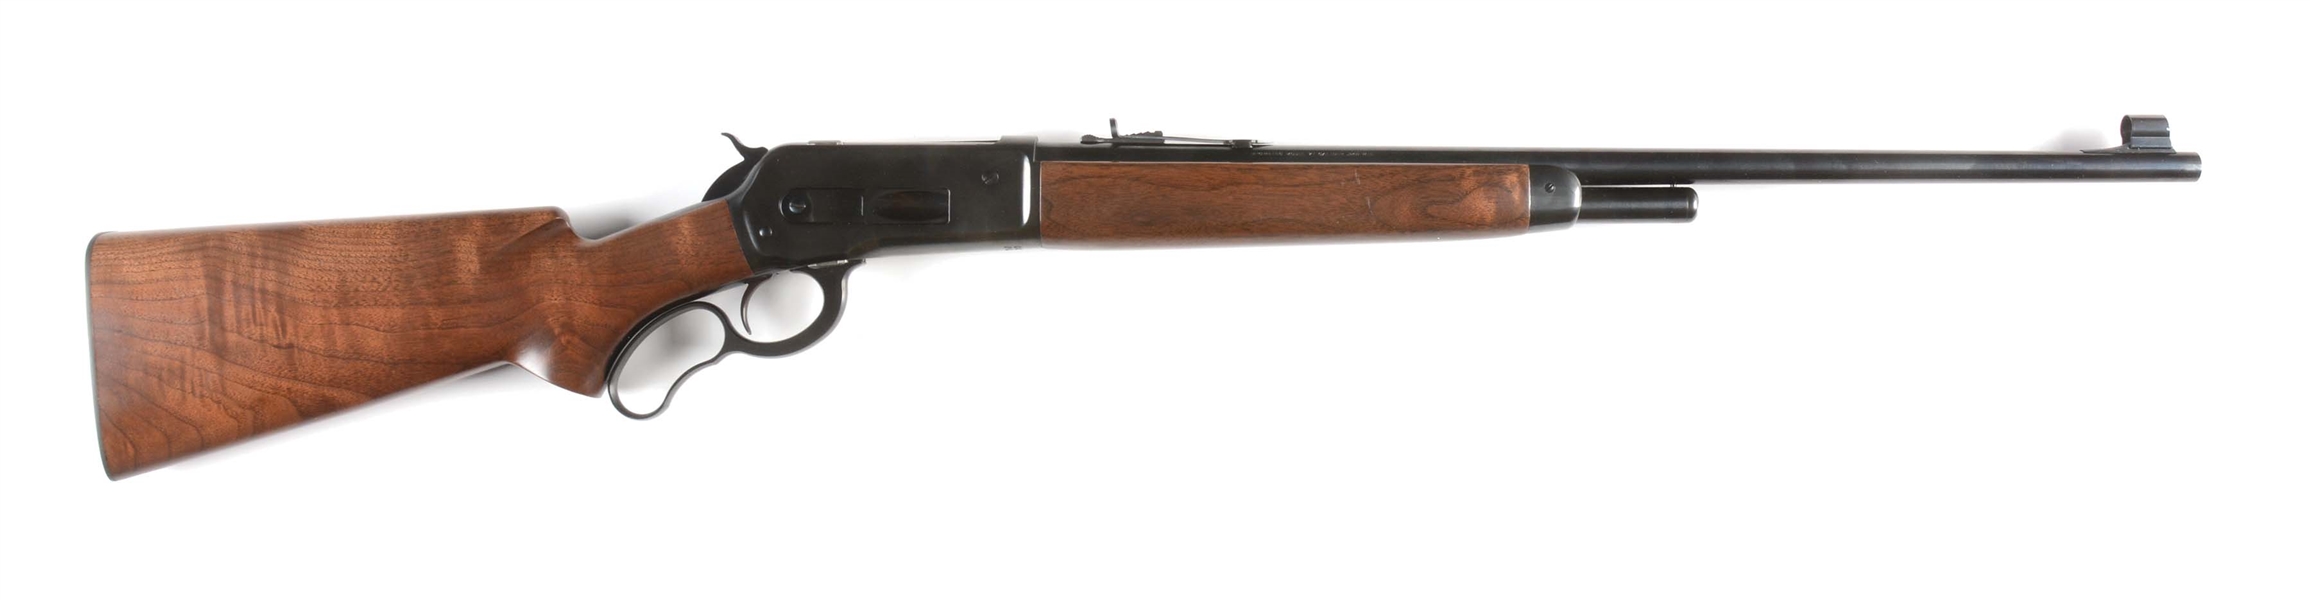 (M) AS NEW BROWNING MODEL M-71 LEVER ACTION RIFLE WITH BOX.